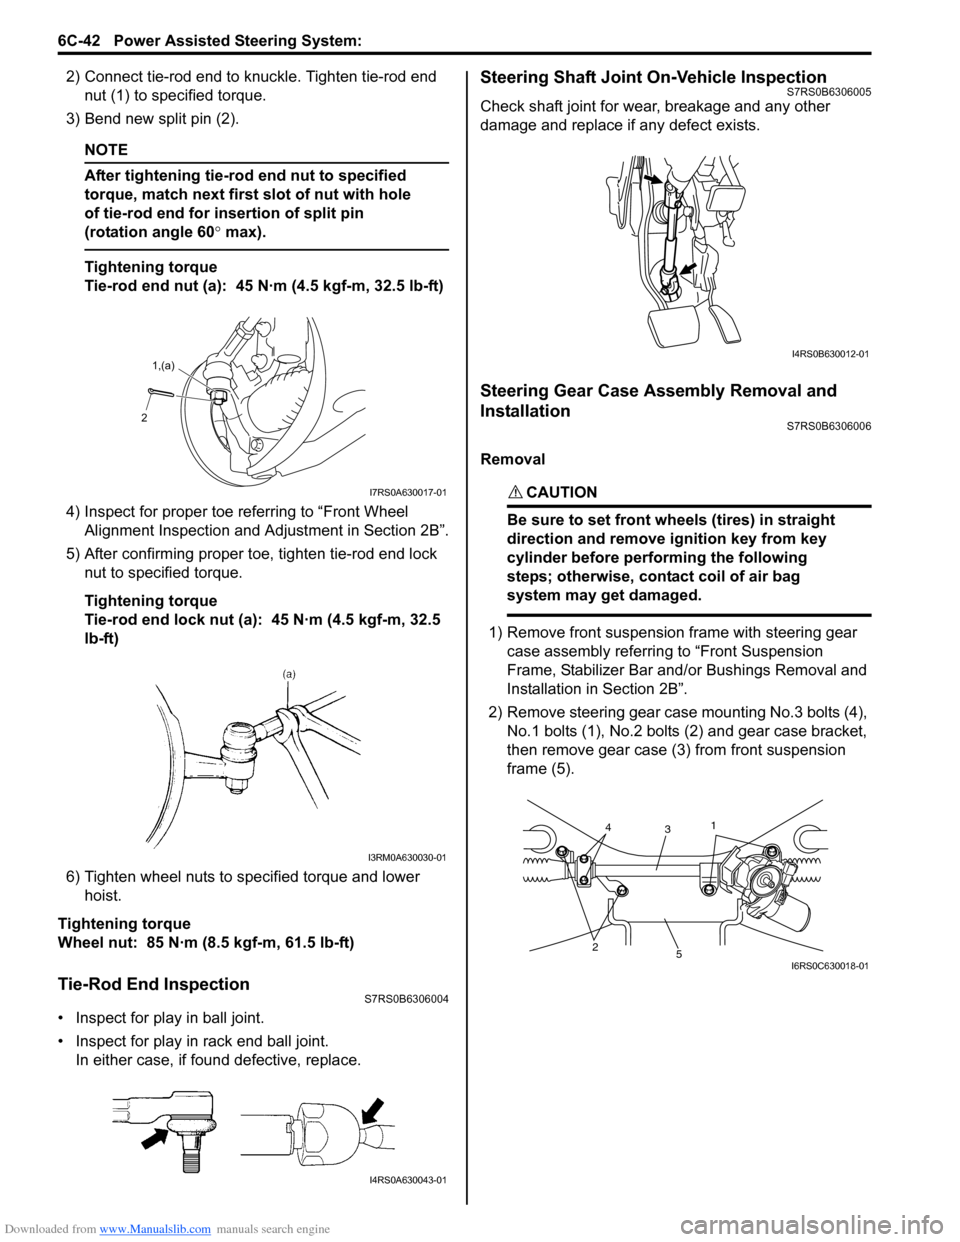 SUZUKI SWIFT 2006 2.G Service Workshop Manual Downloaded from www.Manualslib.com manuals search engine 6C-42 Power Assisted Steering System: 
2) Connect tie-rod end to knuckle. Tighten tie-rod end nut (1) to spec ified torque.
3) Bend new split p